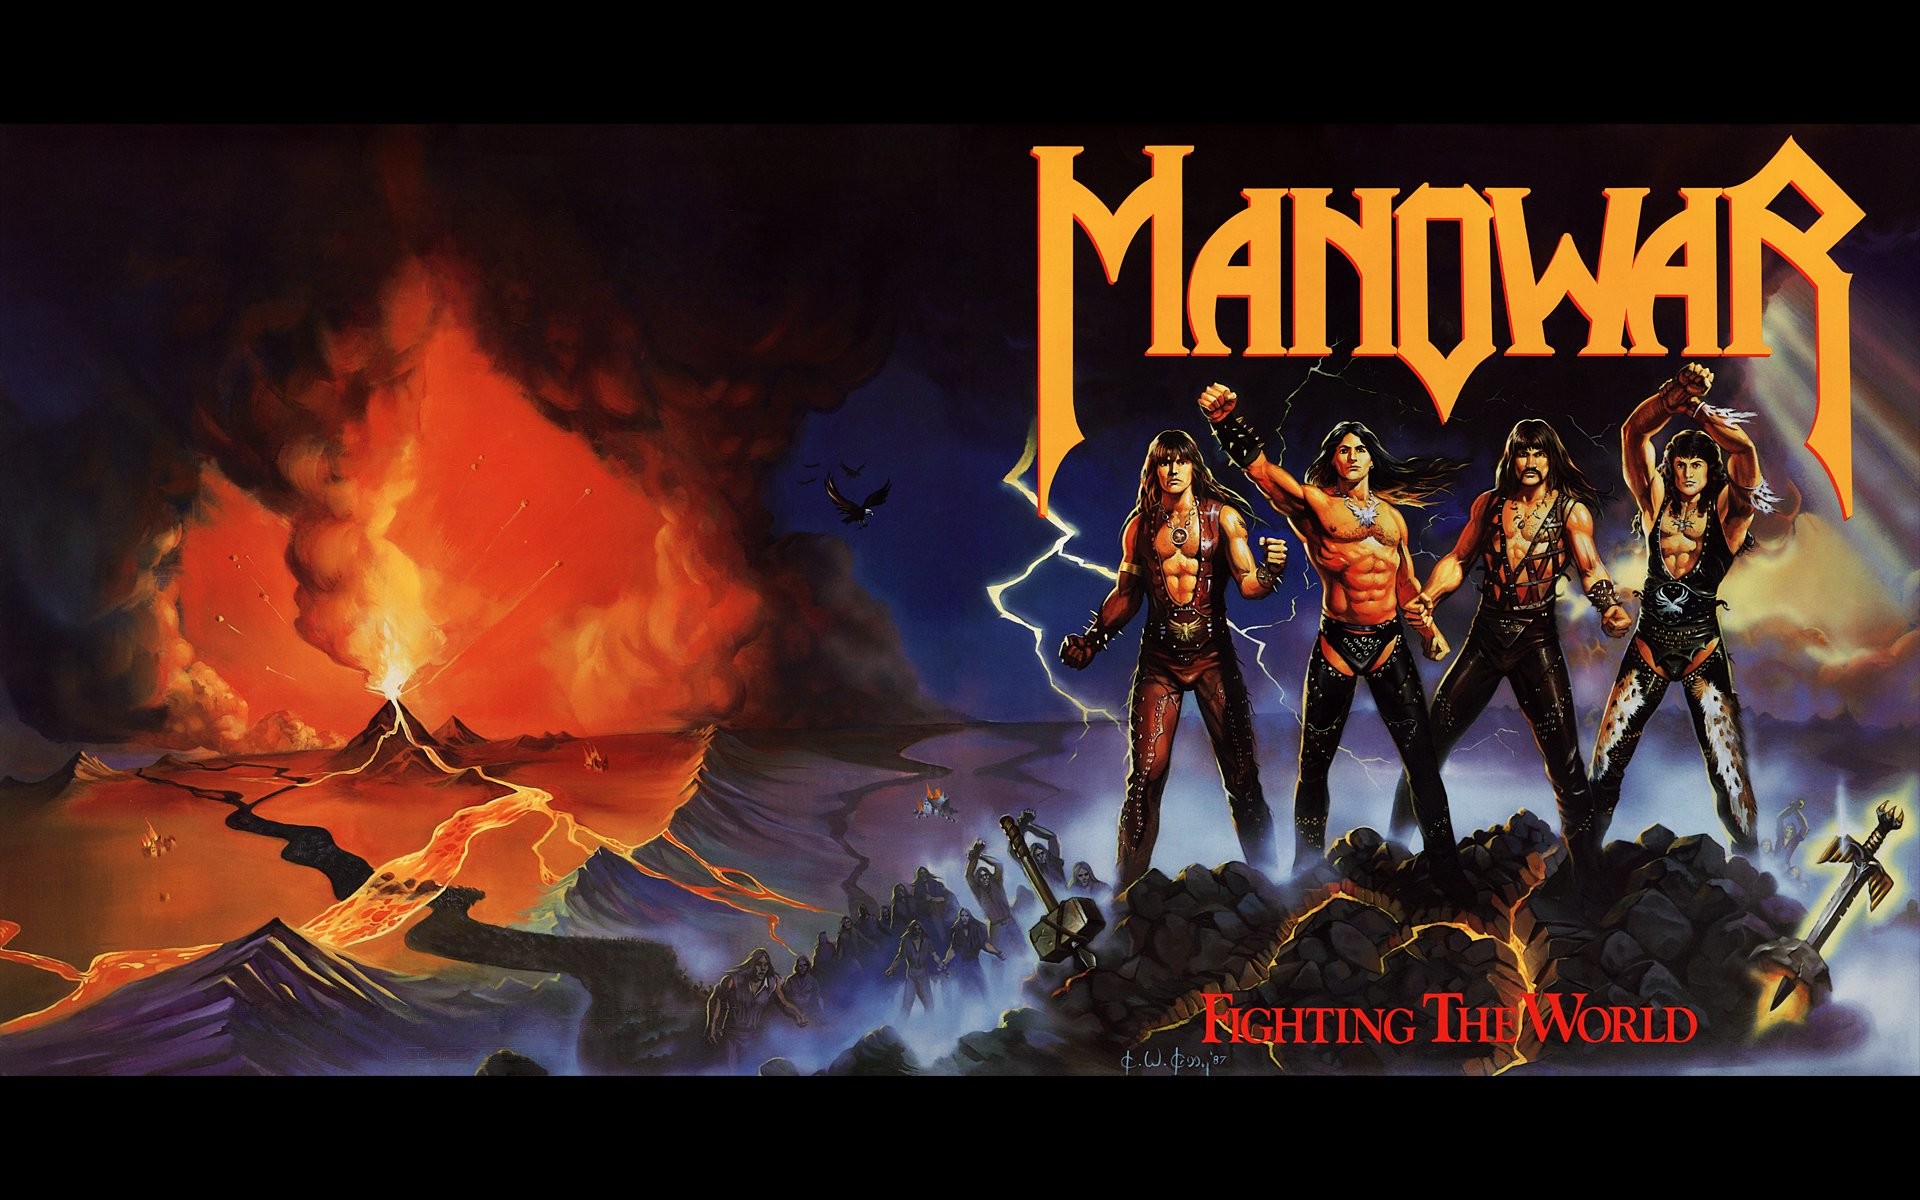 Download Manowar wallpapers for mobile phone free Manowar HD pictures